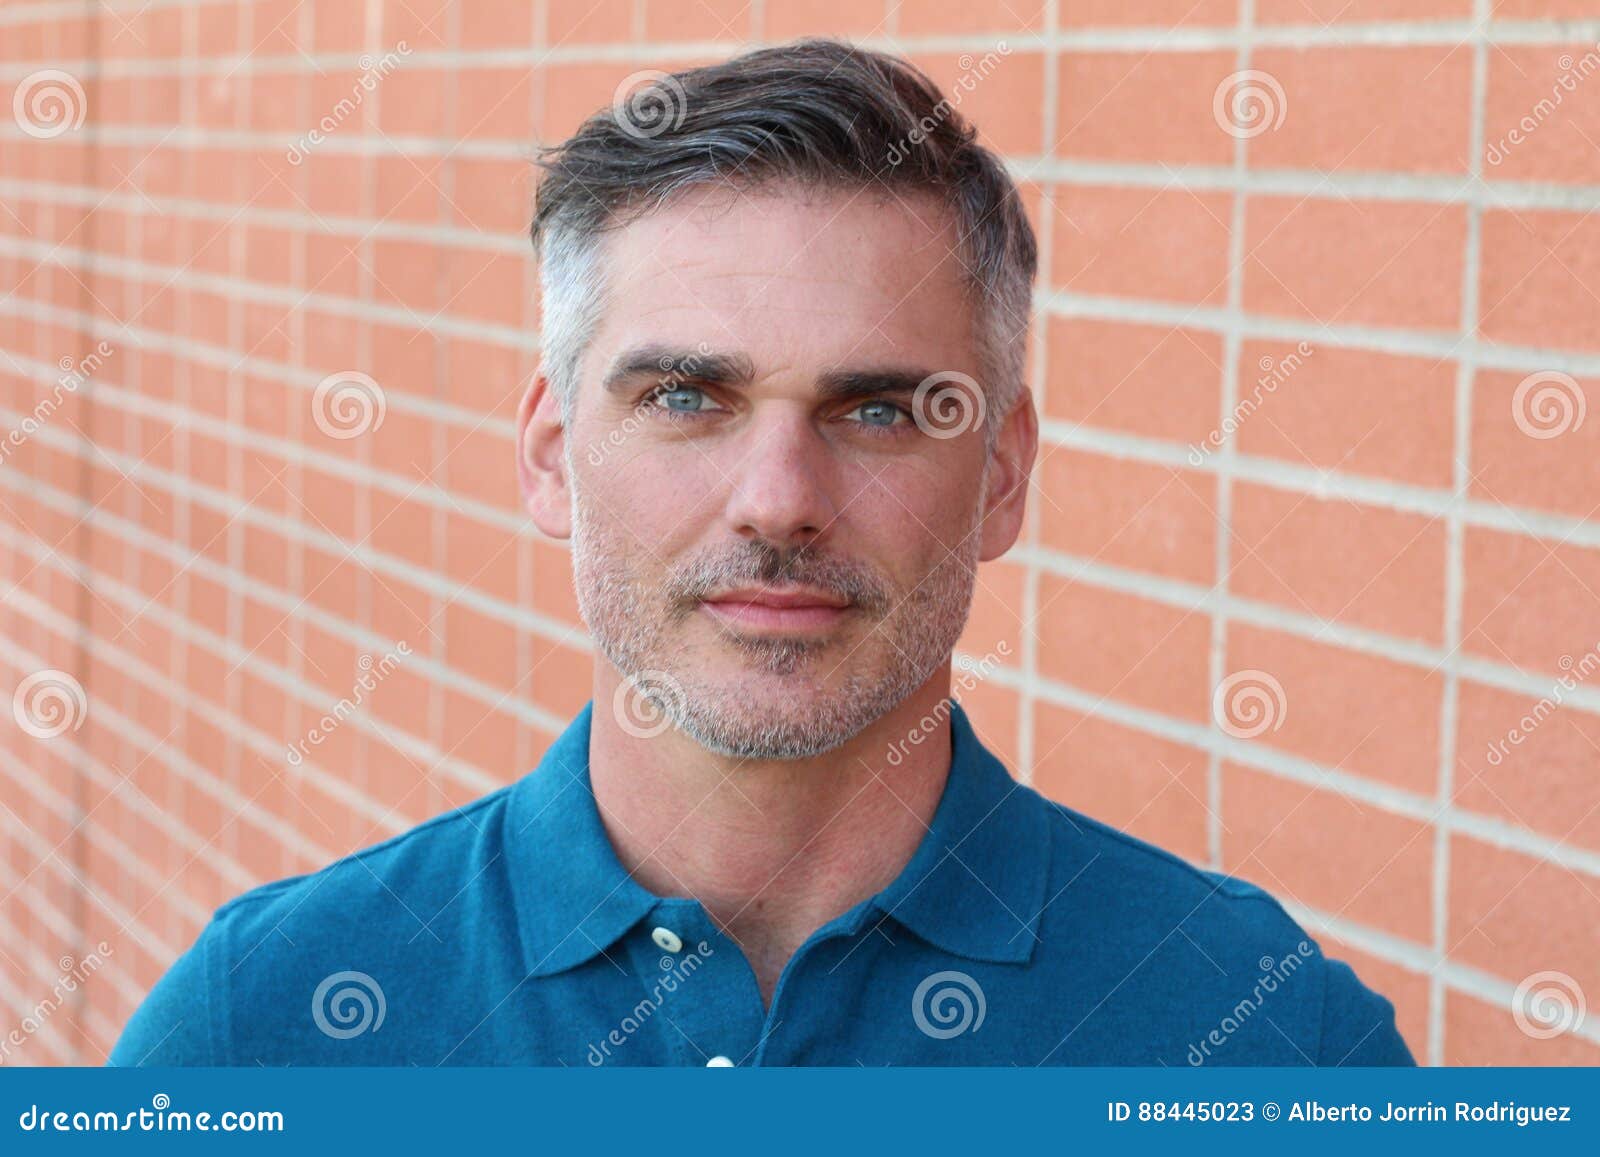 Man with Salt and Pepper Hair Close Up Stock Image - Image of good,  perfection: 88445023